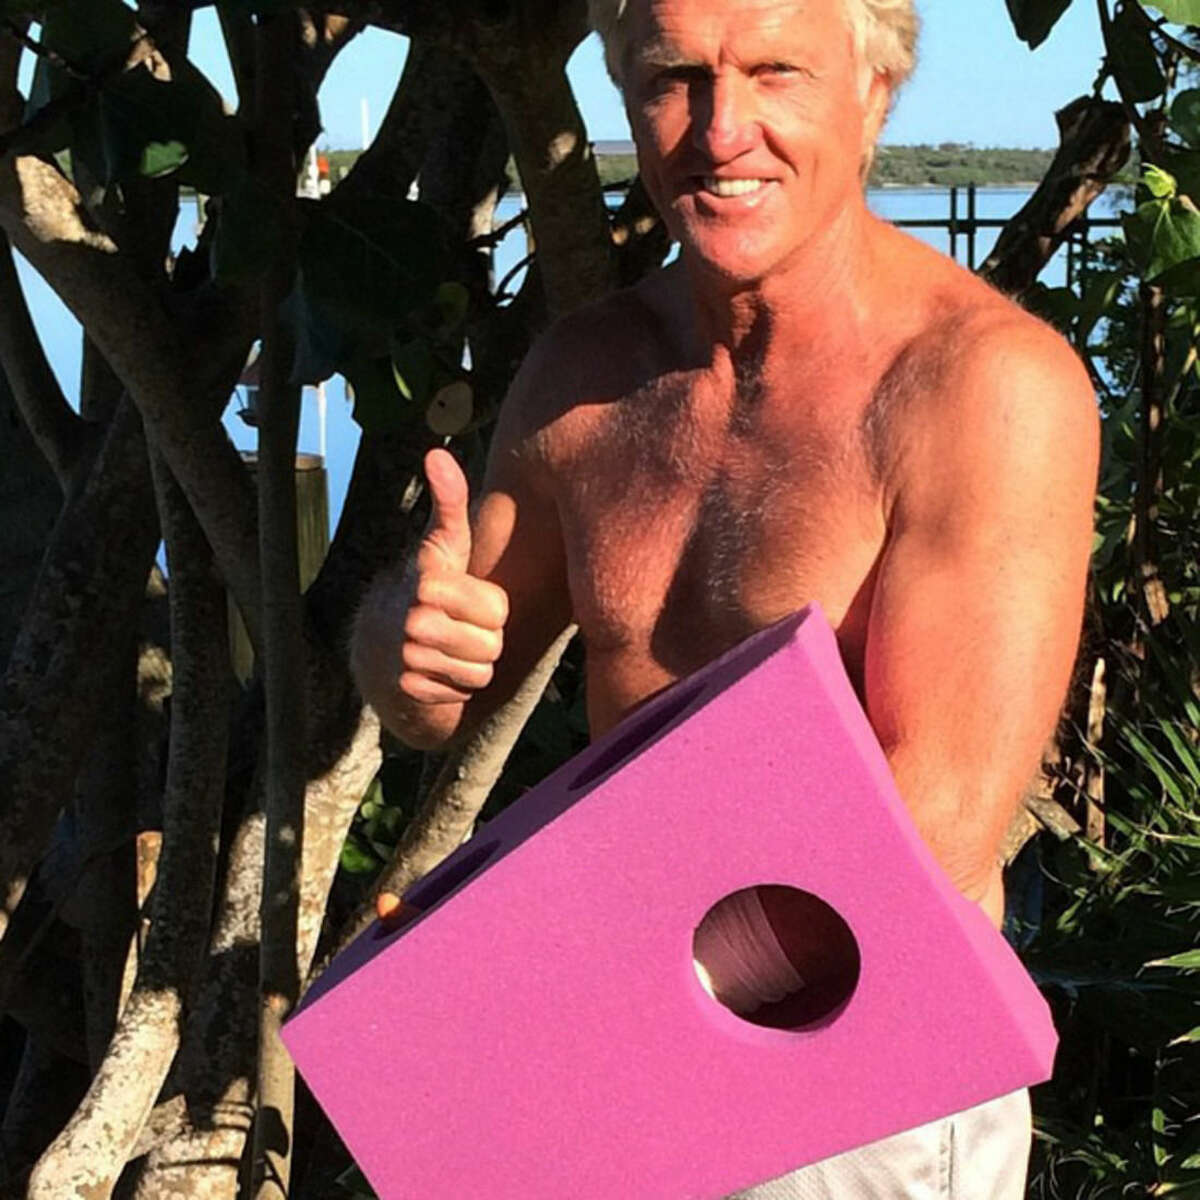 This photo provided by Greg Norman and posted on Instagram on Sunday, Sept. 14, 2014, shows Norman giving the thumbs up with his left hand protected by a purple foam after a chainsaw accident. The Hall of Fame golfer and entrepreneur, was cutting back trees in his South Florida home when the weight of a branch pulled his left hand toward the chain saw. He said the blade hit him just below where a person would be wearing a wrist watch. He said doctors told him it missed his artery by a fraction of an inch. (AP Photo/Courtesy of Greg Norman) NO SALES